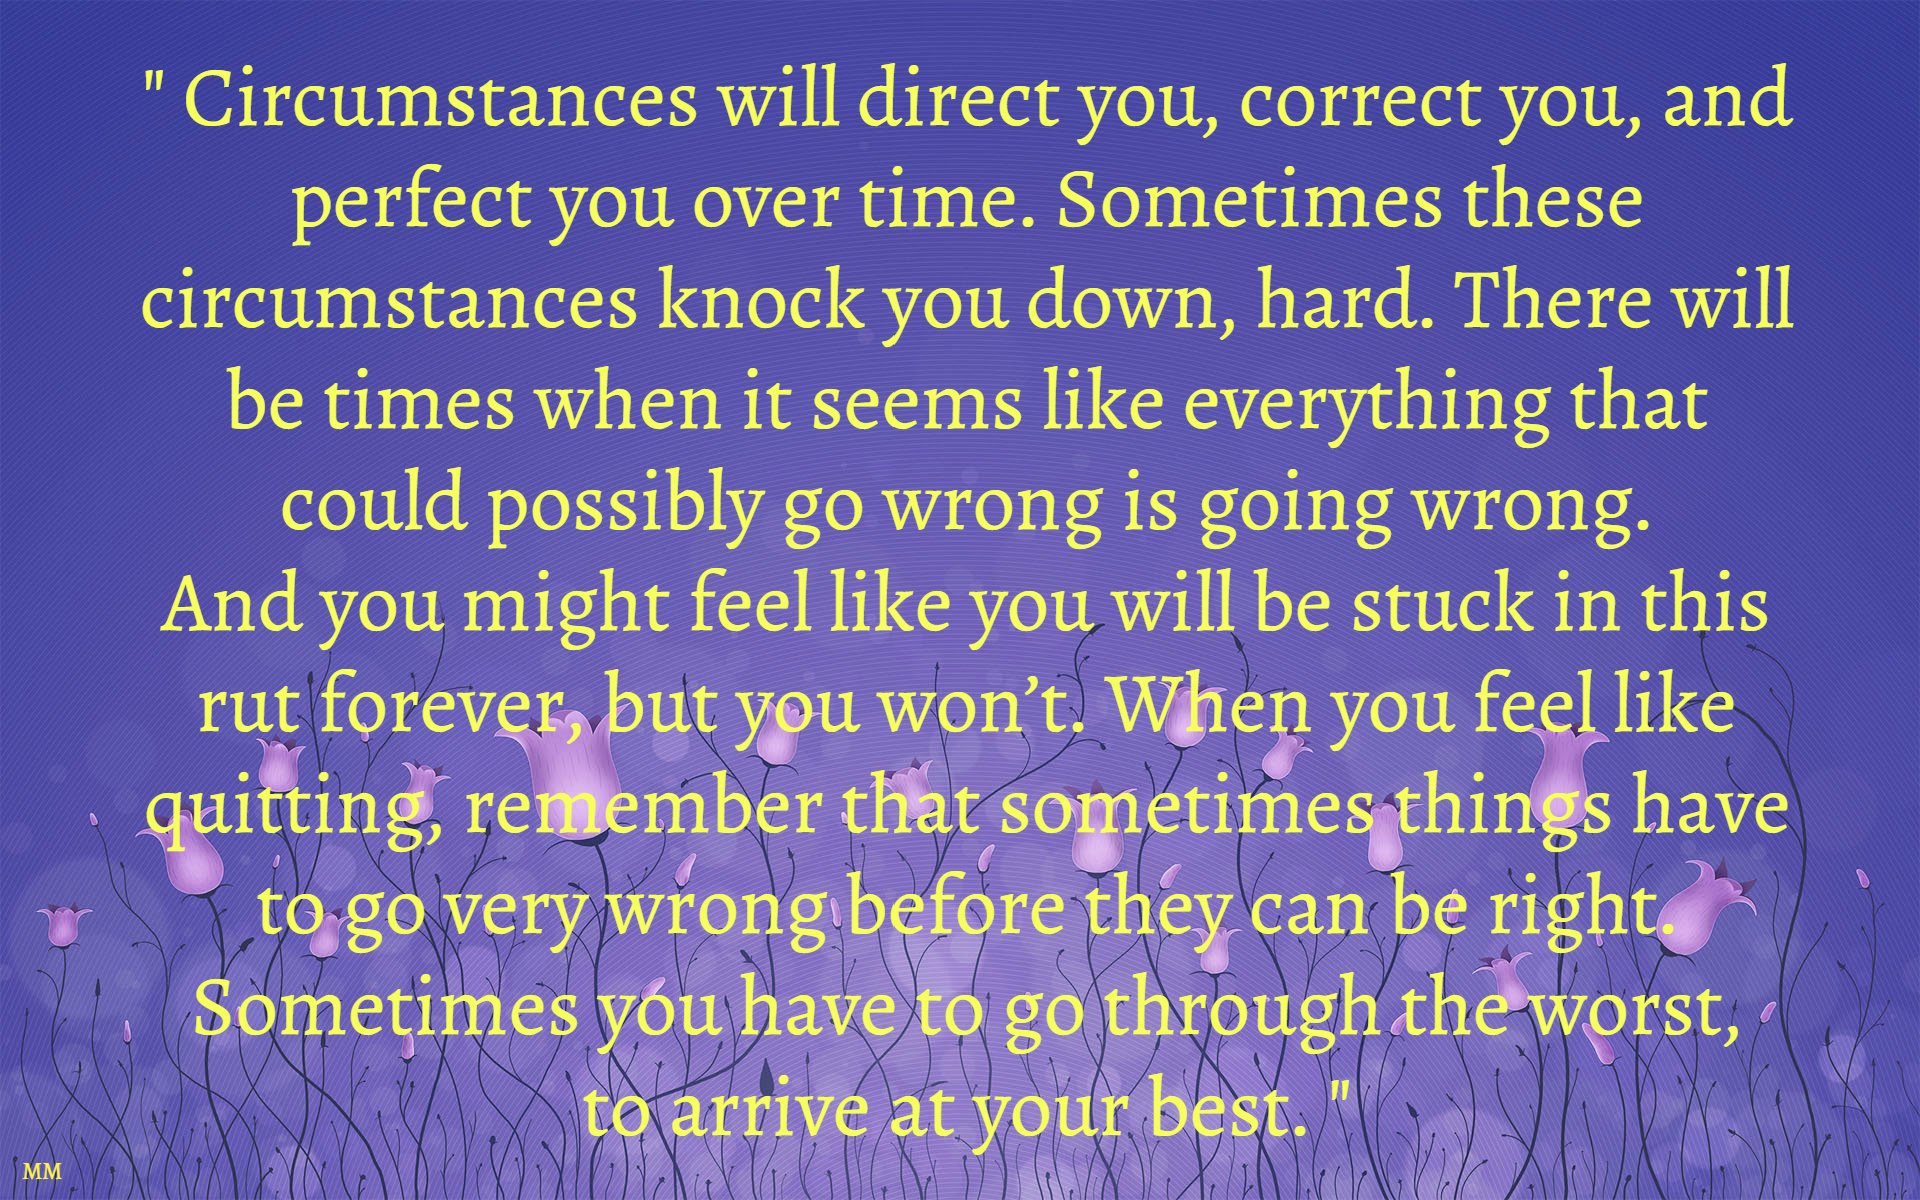 Circumstances will direct you, correct you, and perfect you over time. Sometimes these circumstances knock you down, hard. There will be...